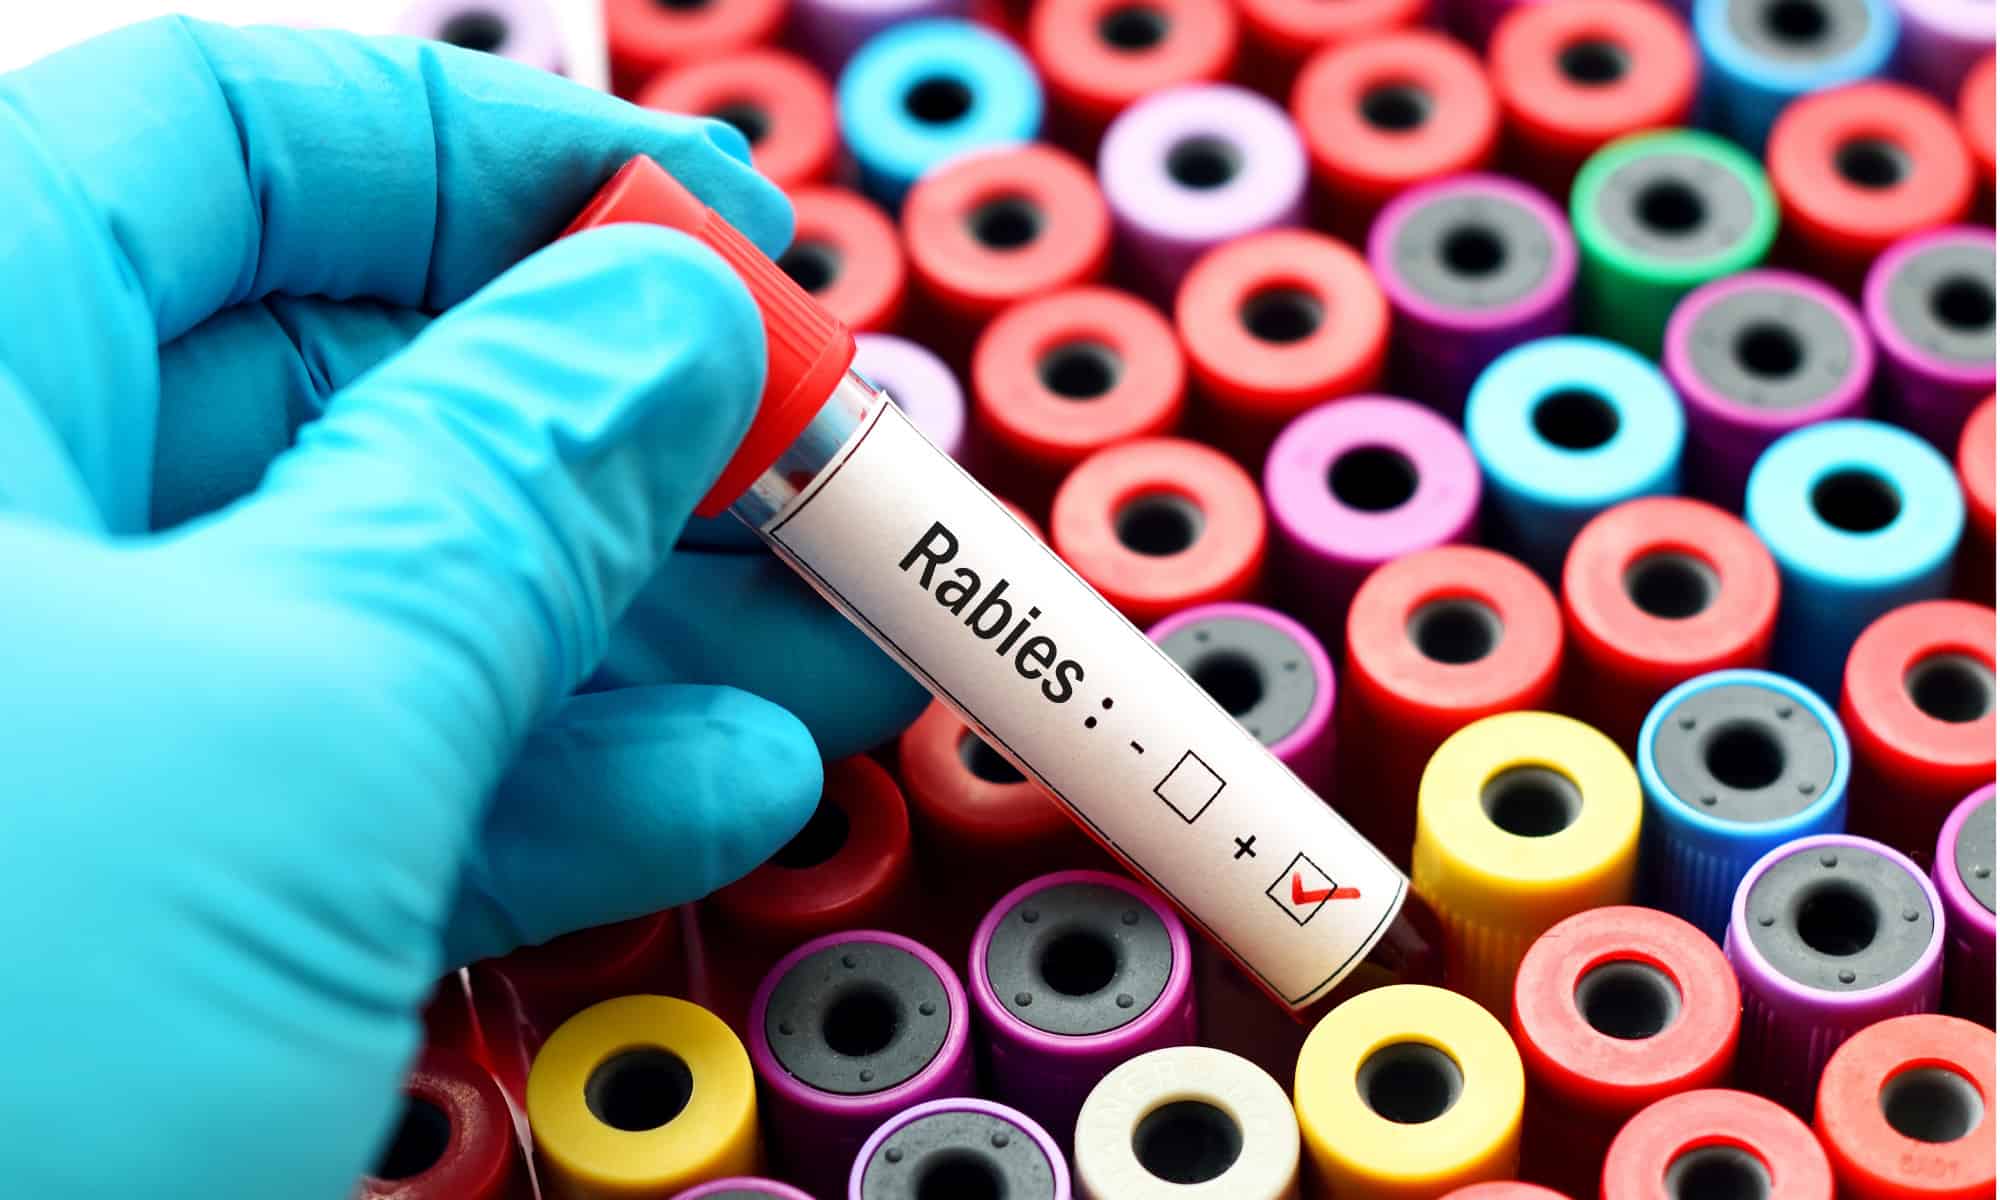 A gloved hand selecting a vial of rabies vaccine